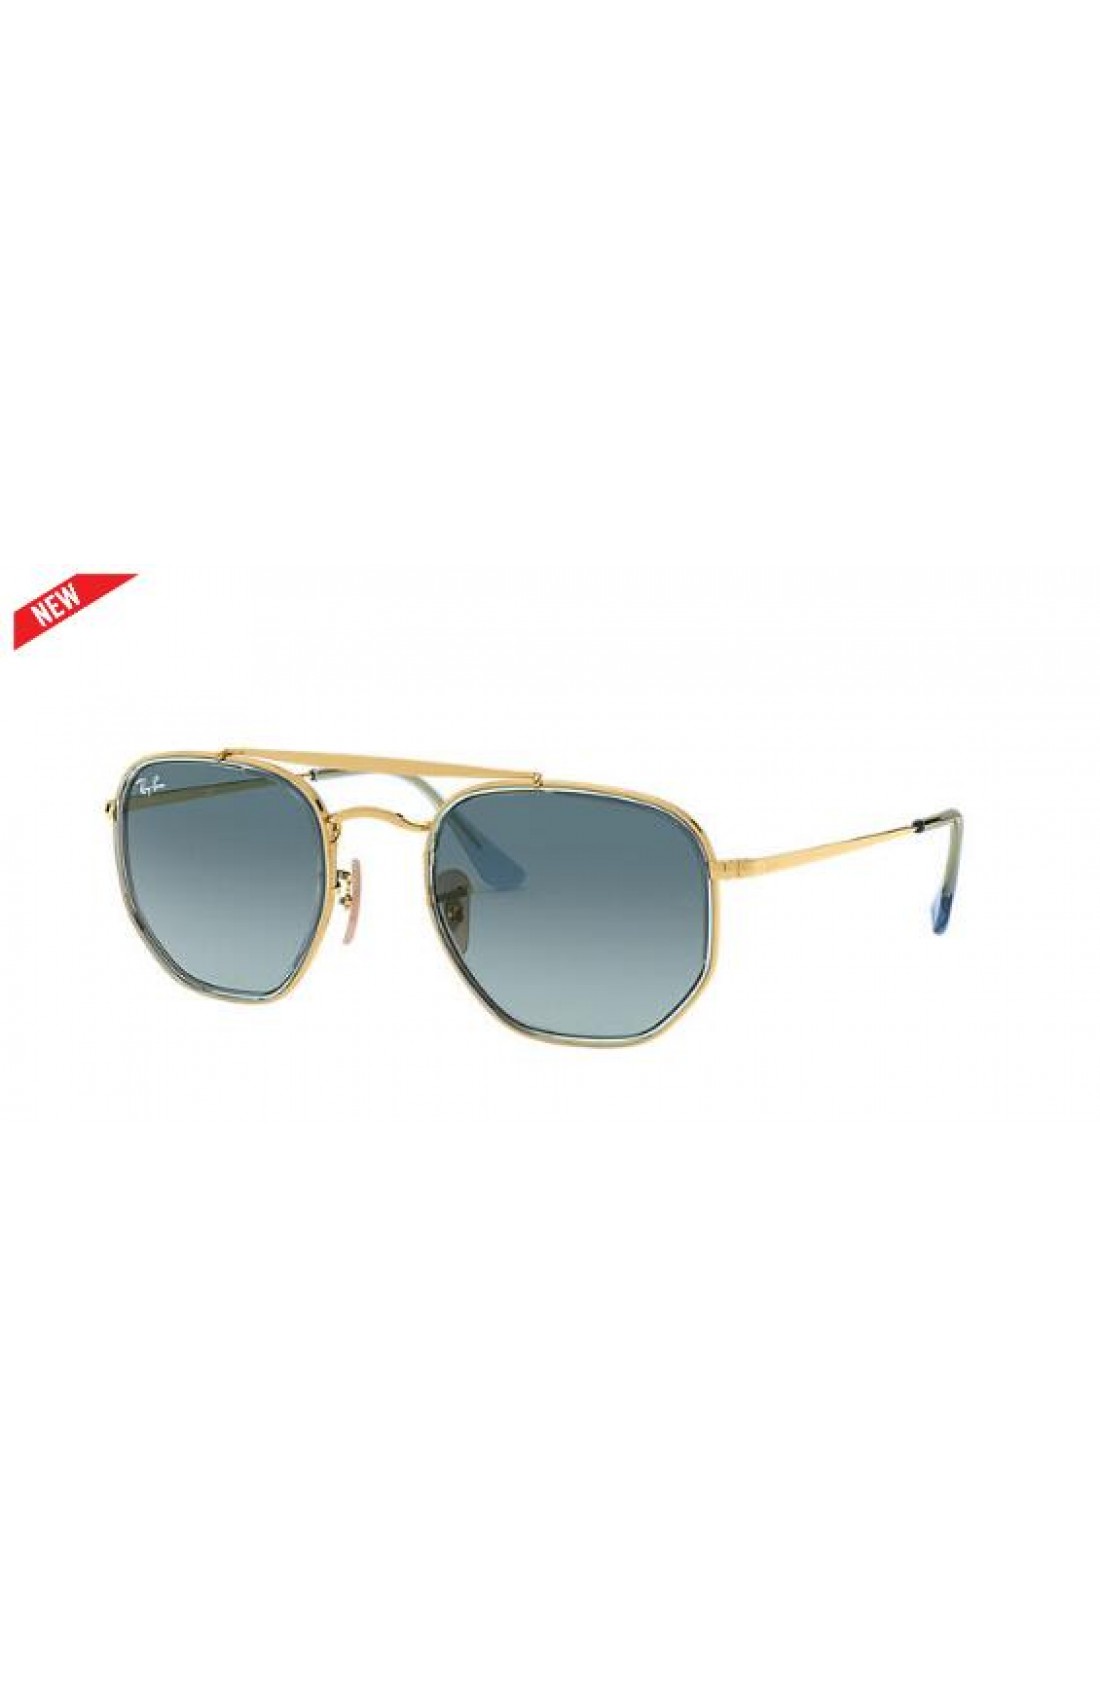 Knockoff Ray Ban Marshal Ii Sunglasses Gold Light Blue Brown Frame Blue Gradient Lens For Sale Online